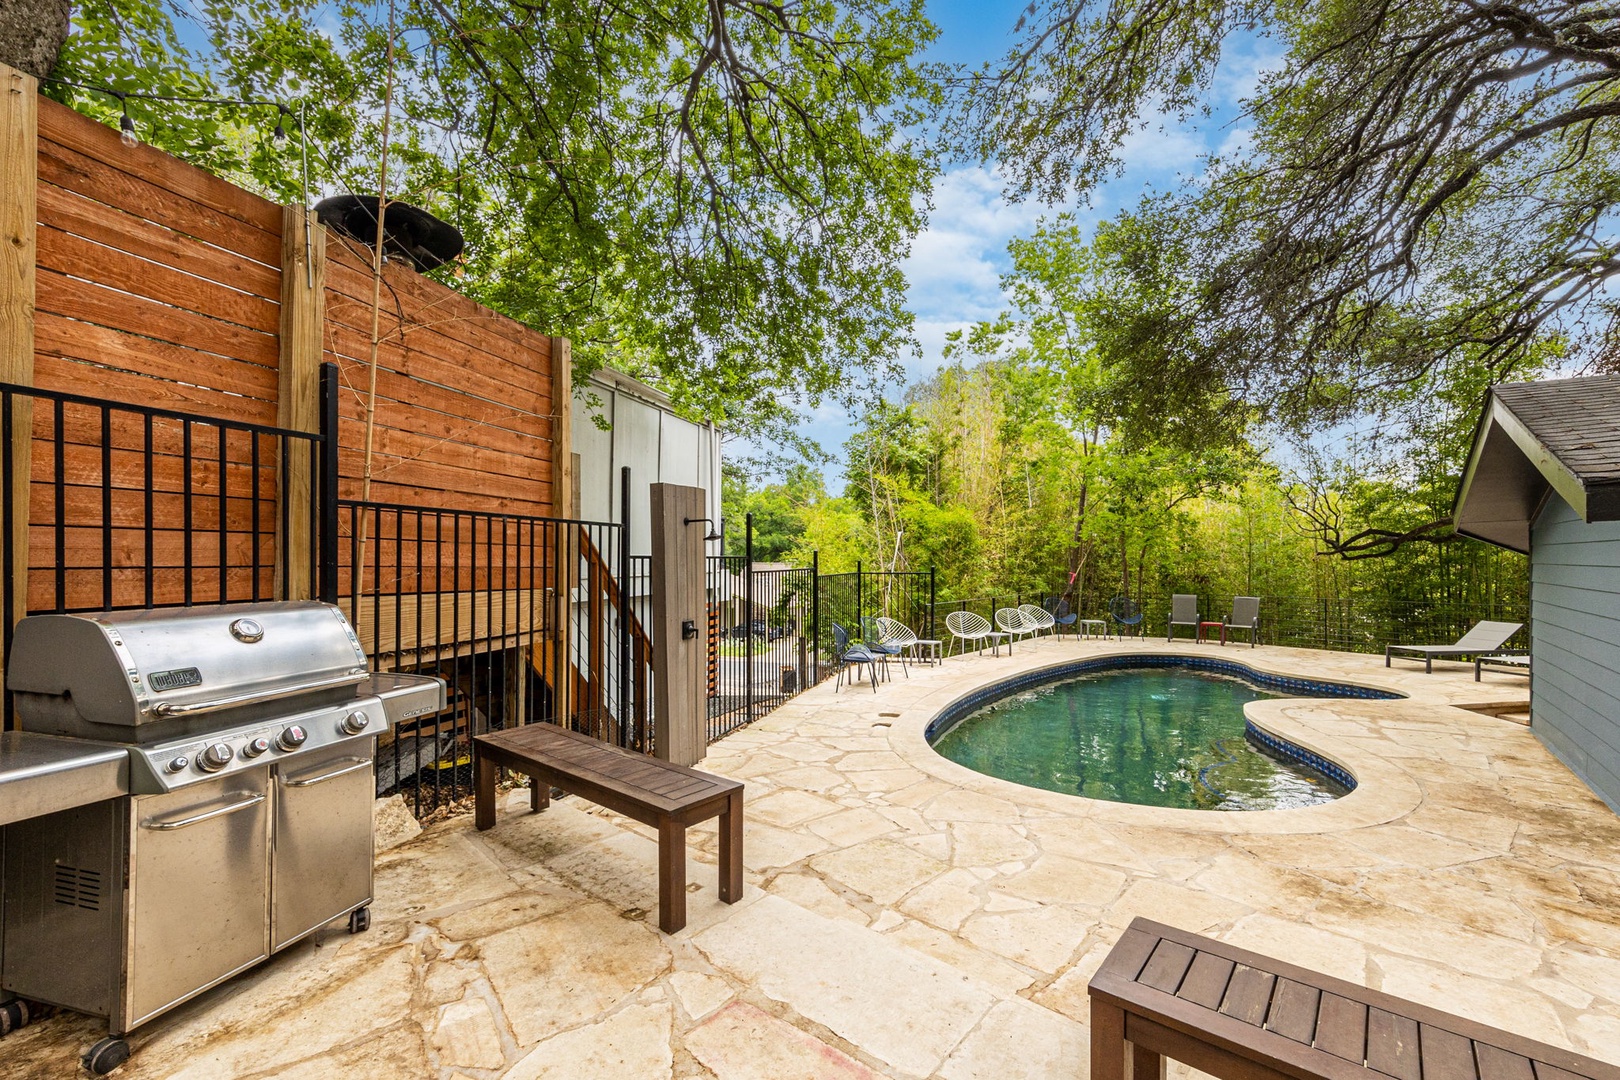 Outdoor area with pool, gas grill, outdoor shower area and ample seating